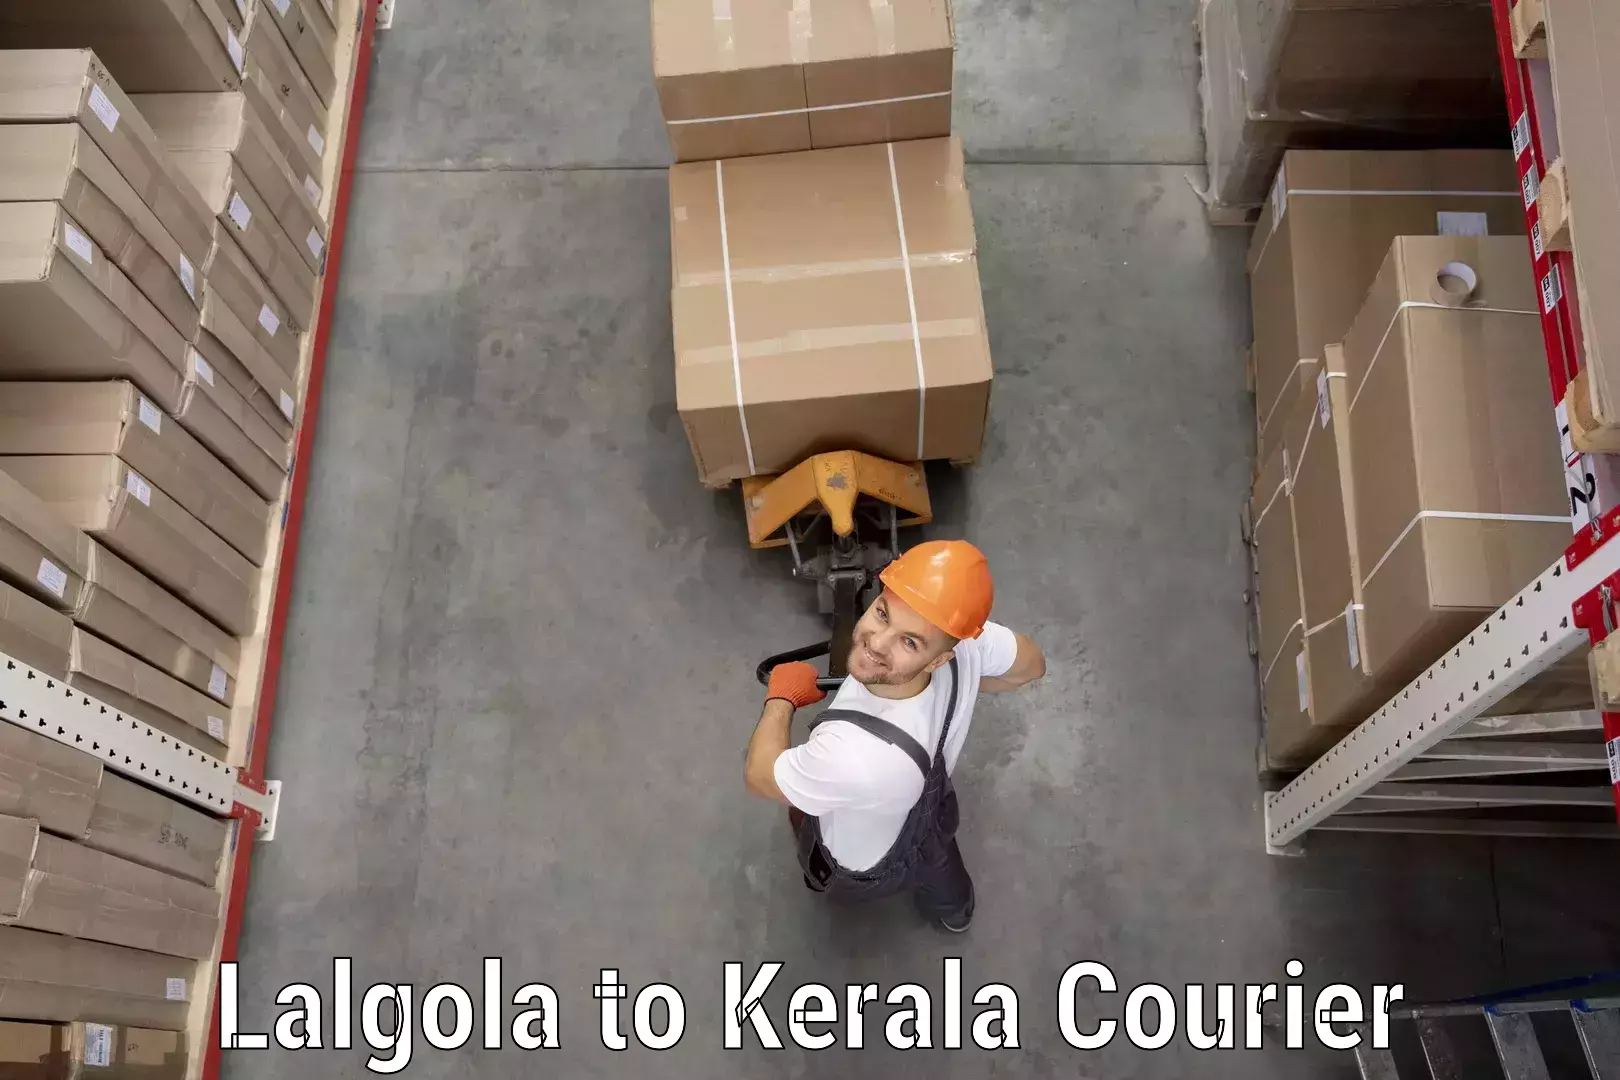 Courier service partnerships Lalgola to Kerala